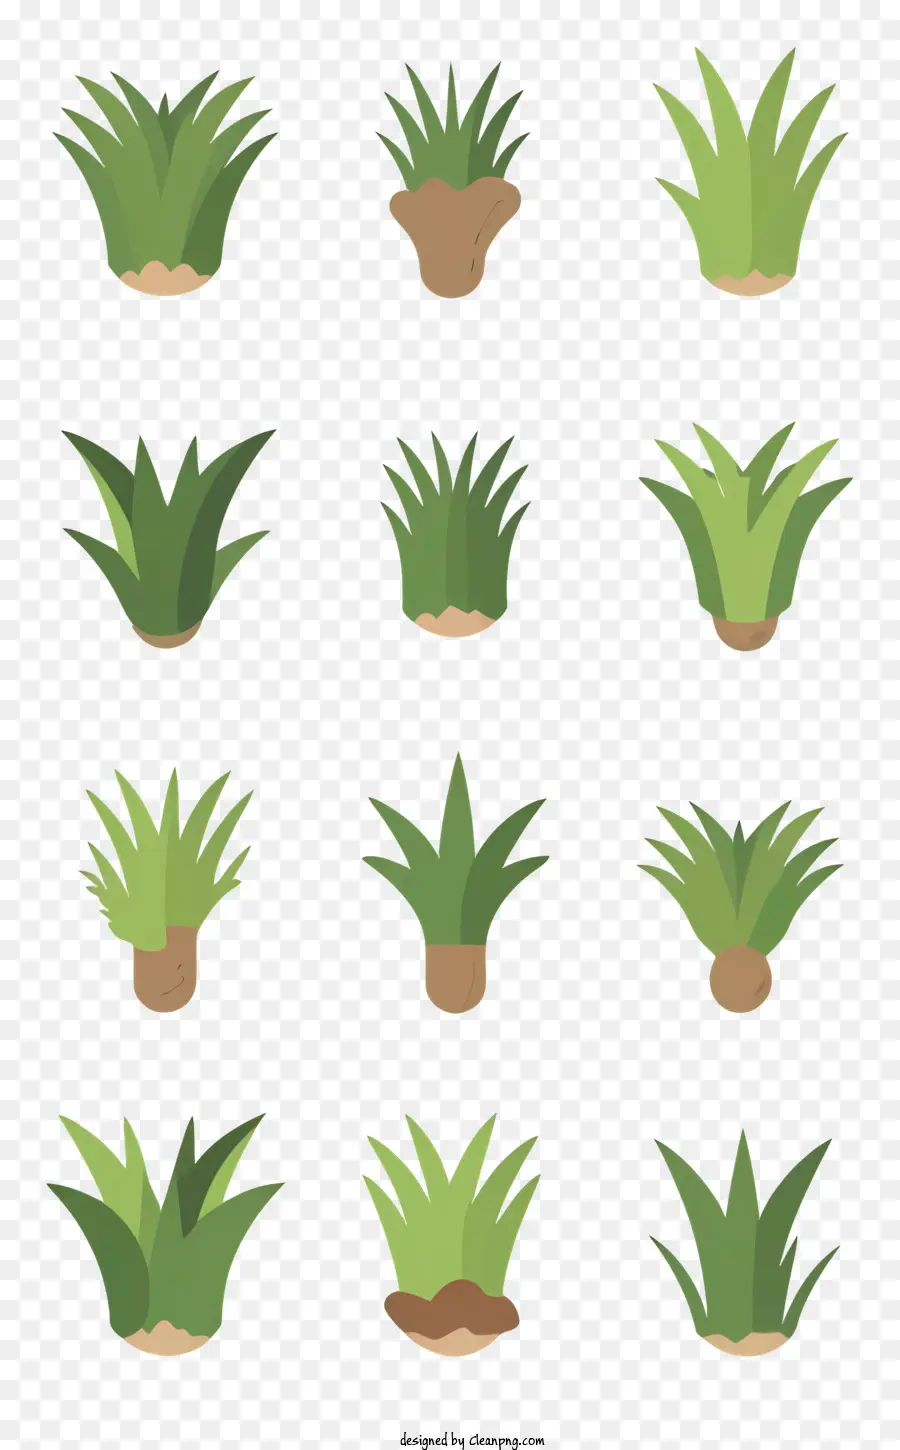 plants green different shapes different sizes textures